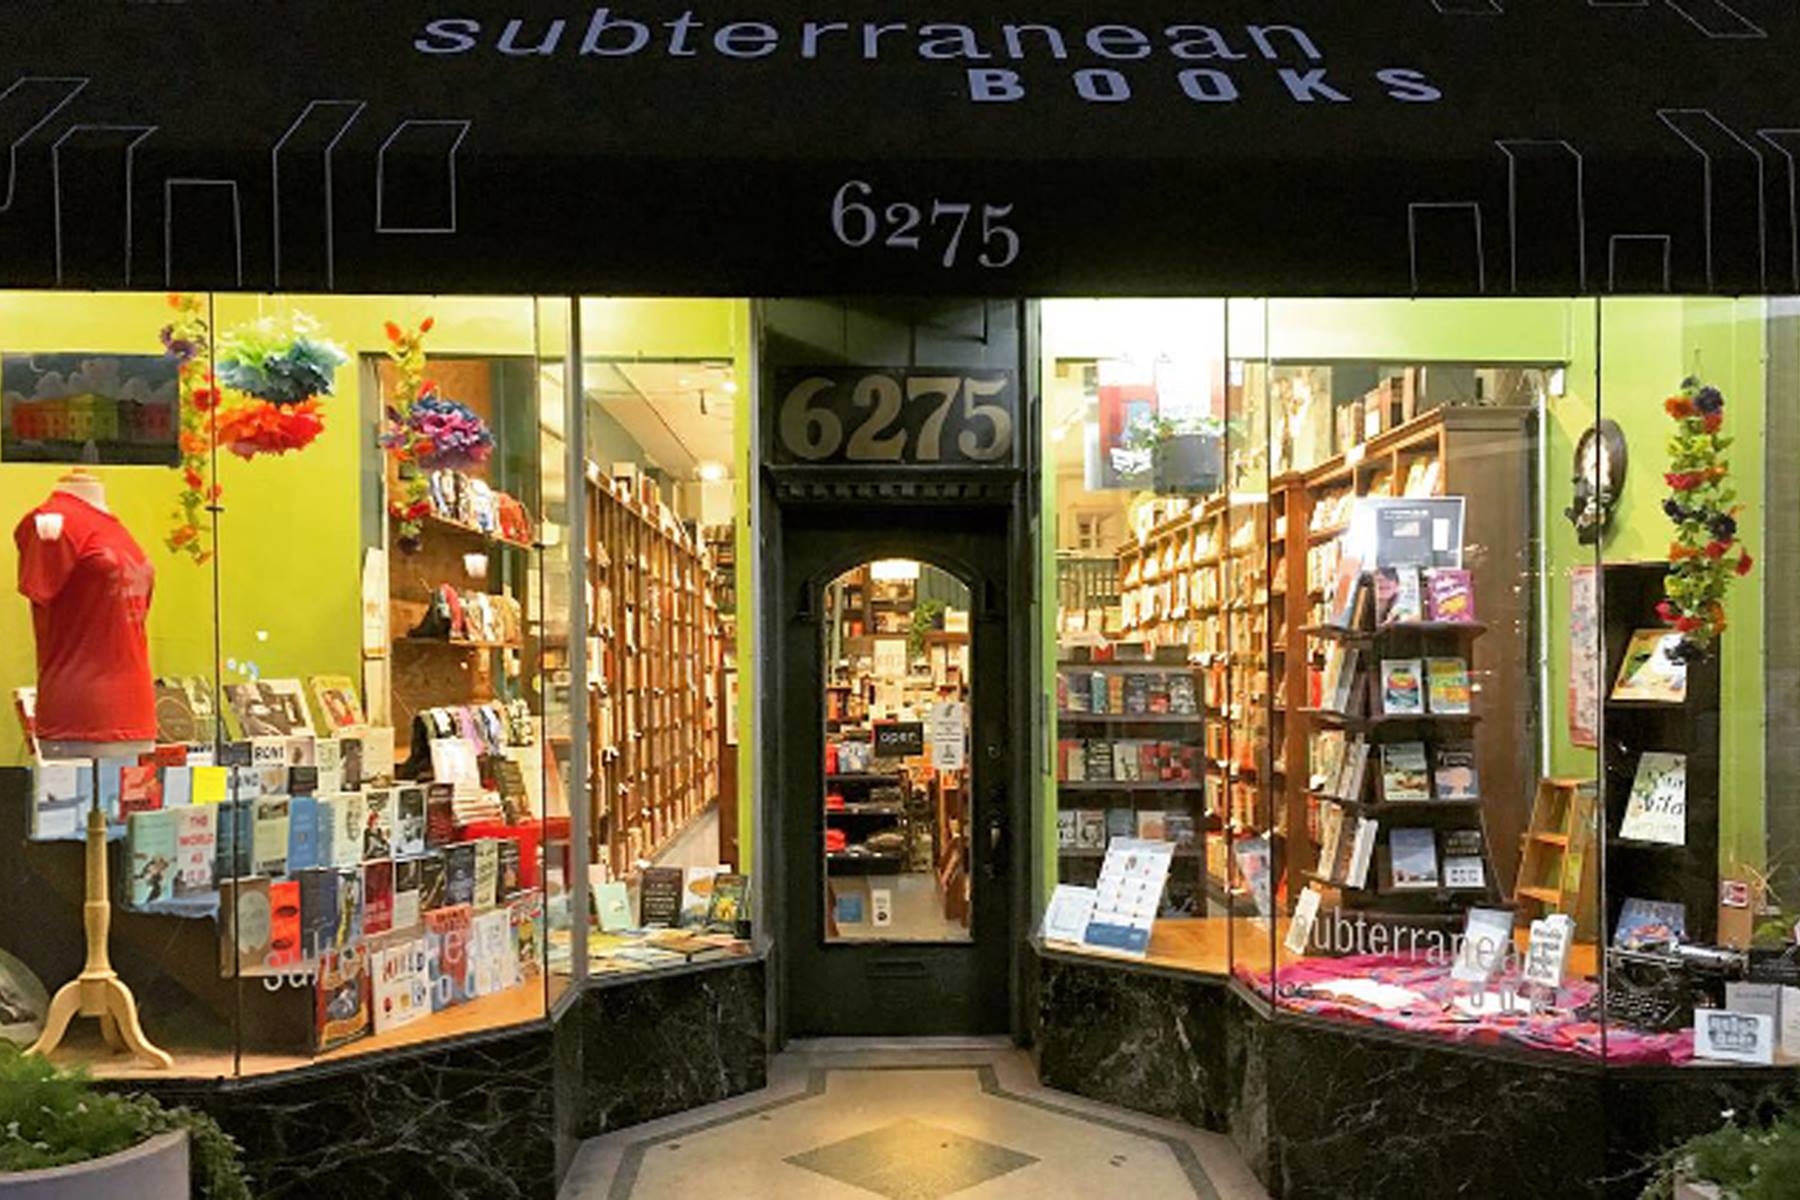 Celebrate Independent Bookstore Day!